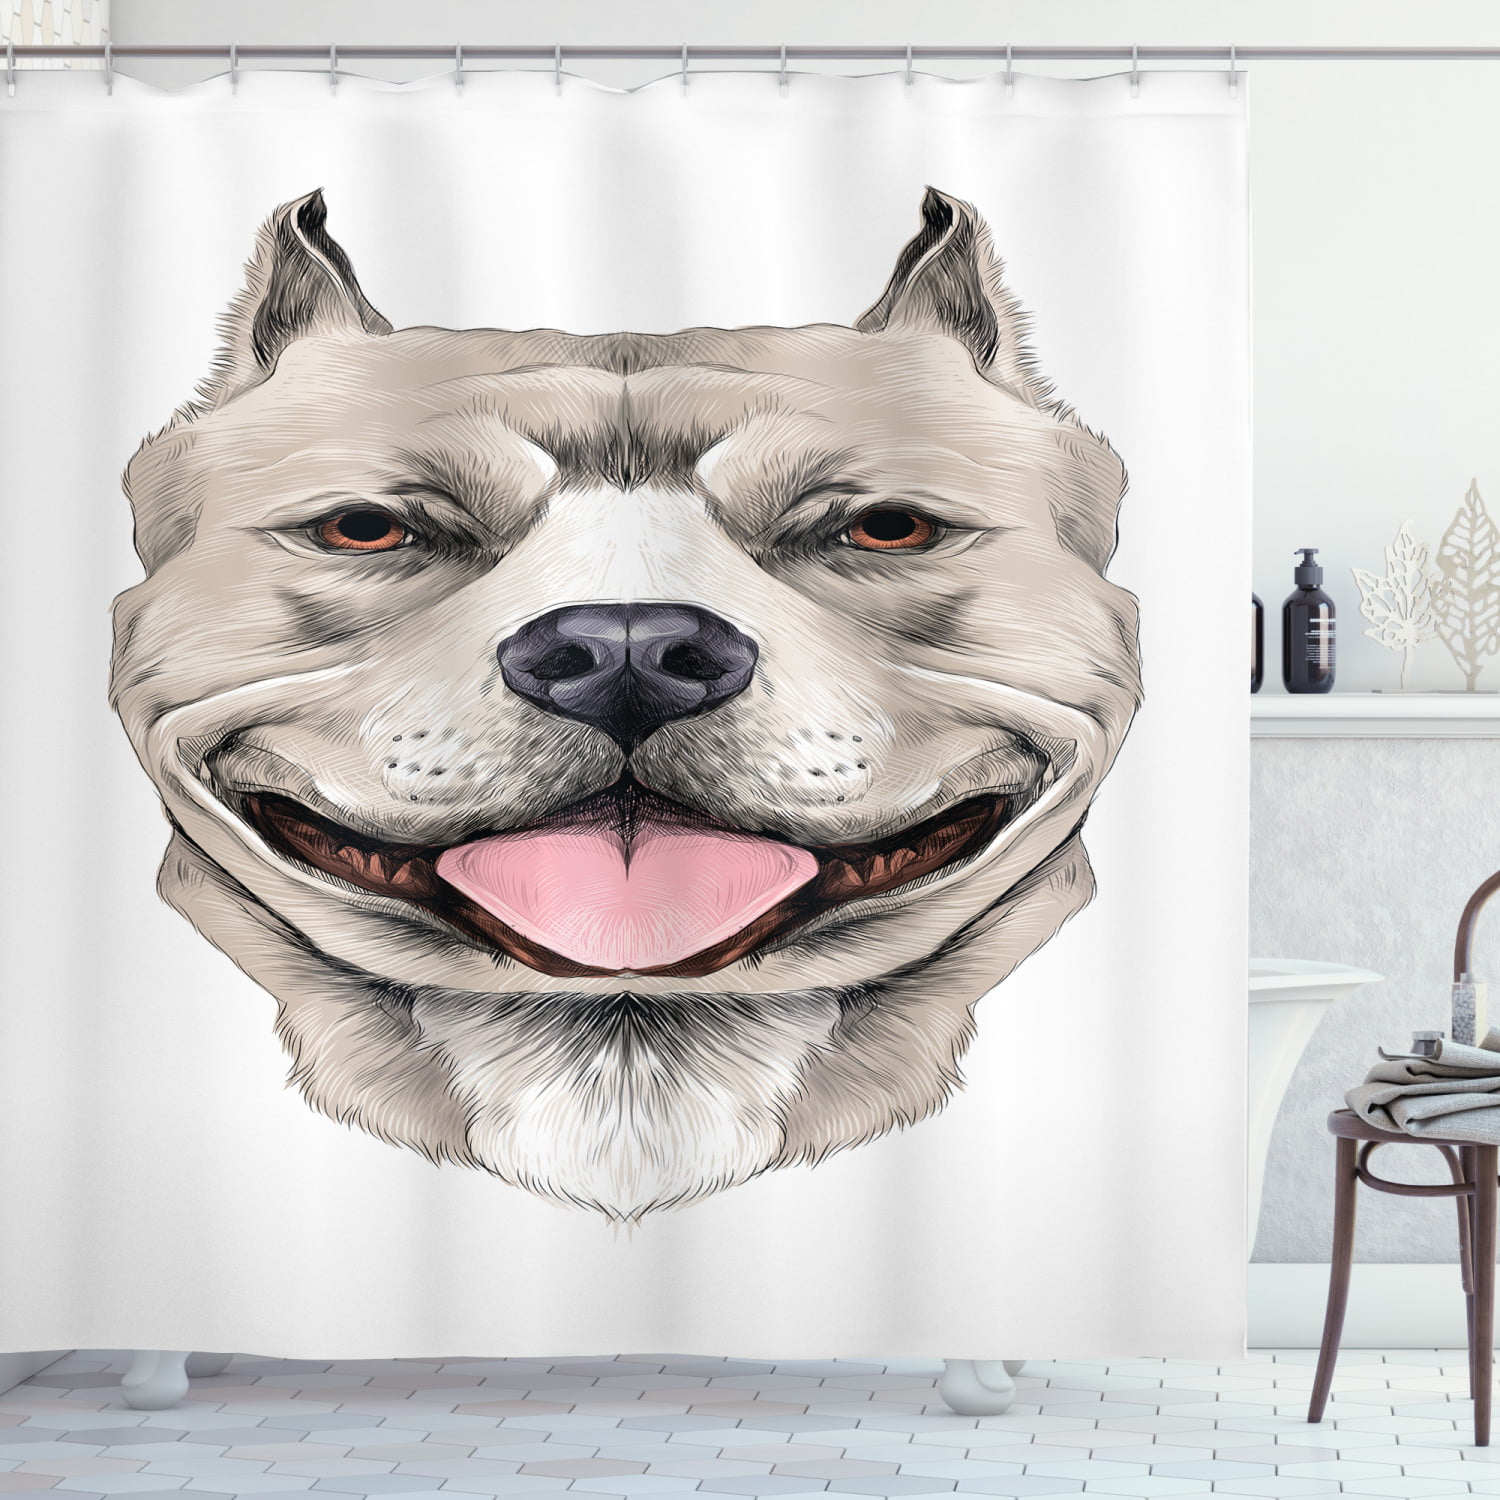 Dog Shower Curtain Pit Bull Shower Curtains Colorful Bath Decor Waterproof Polyester Fabric